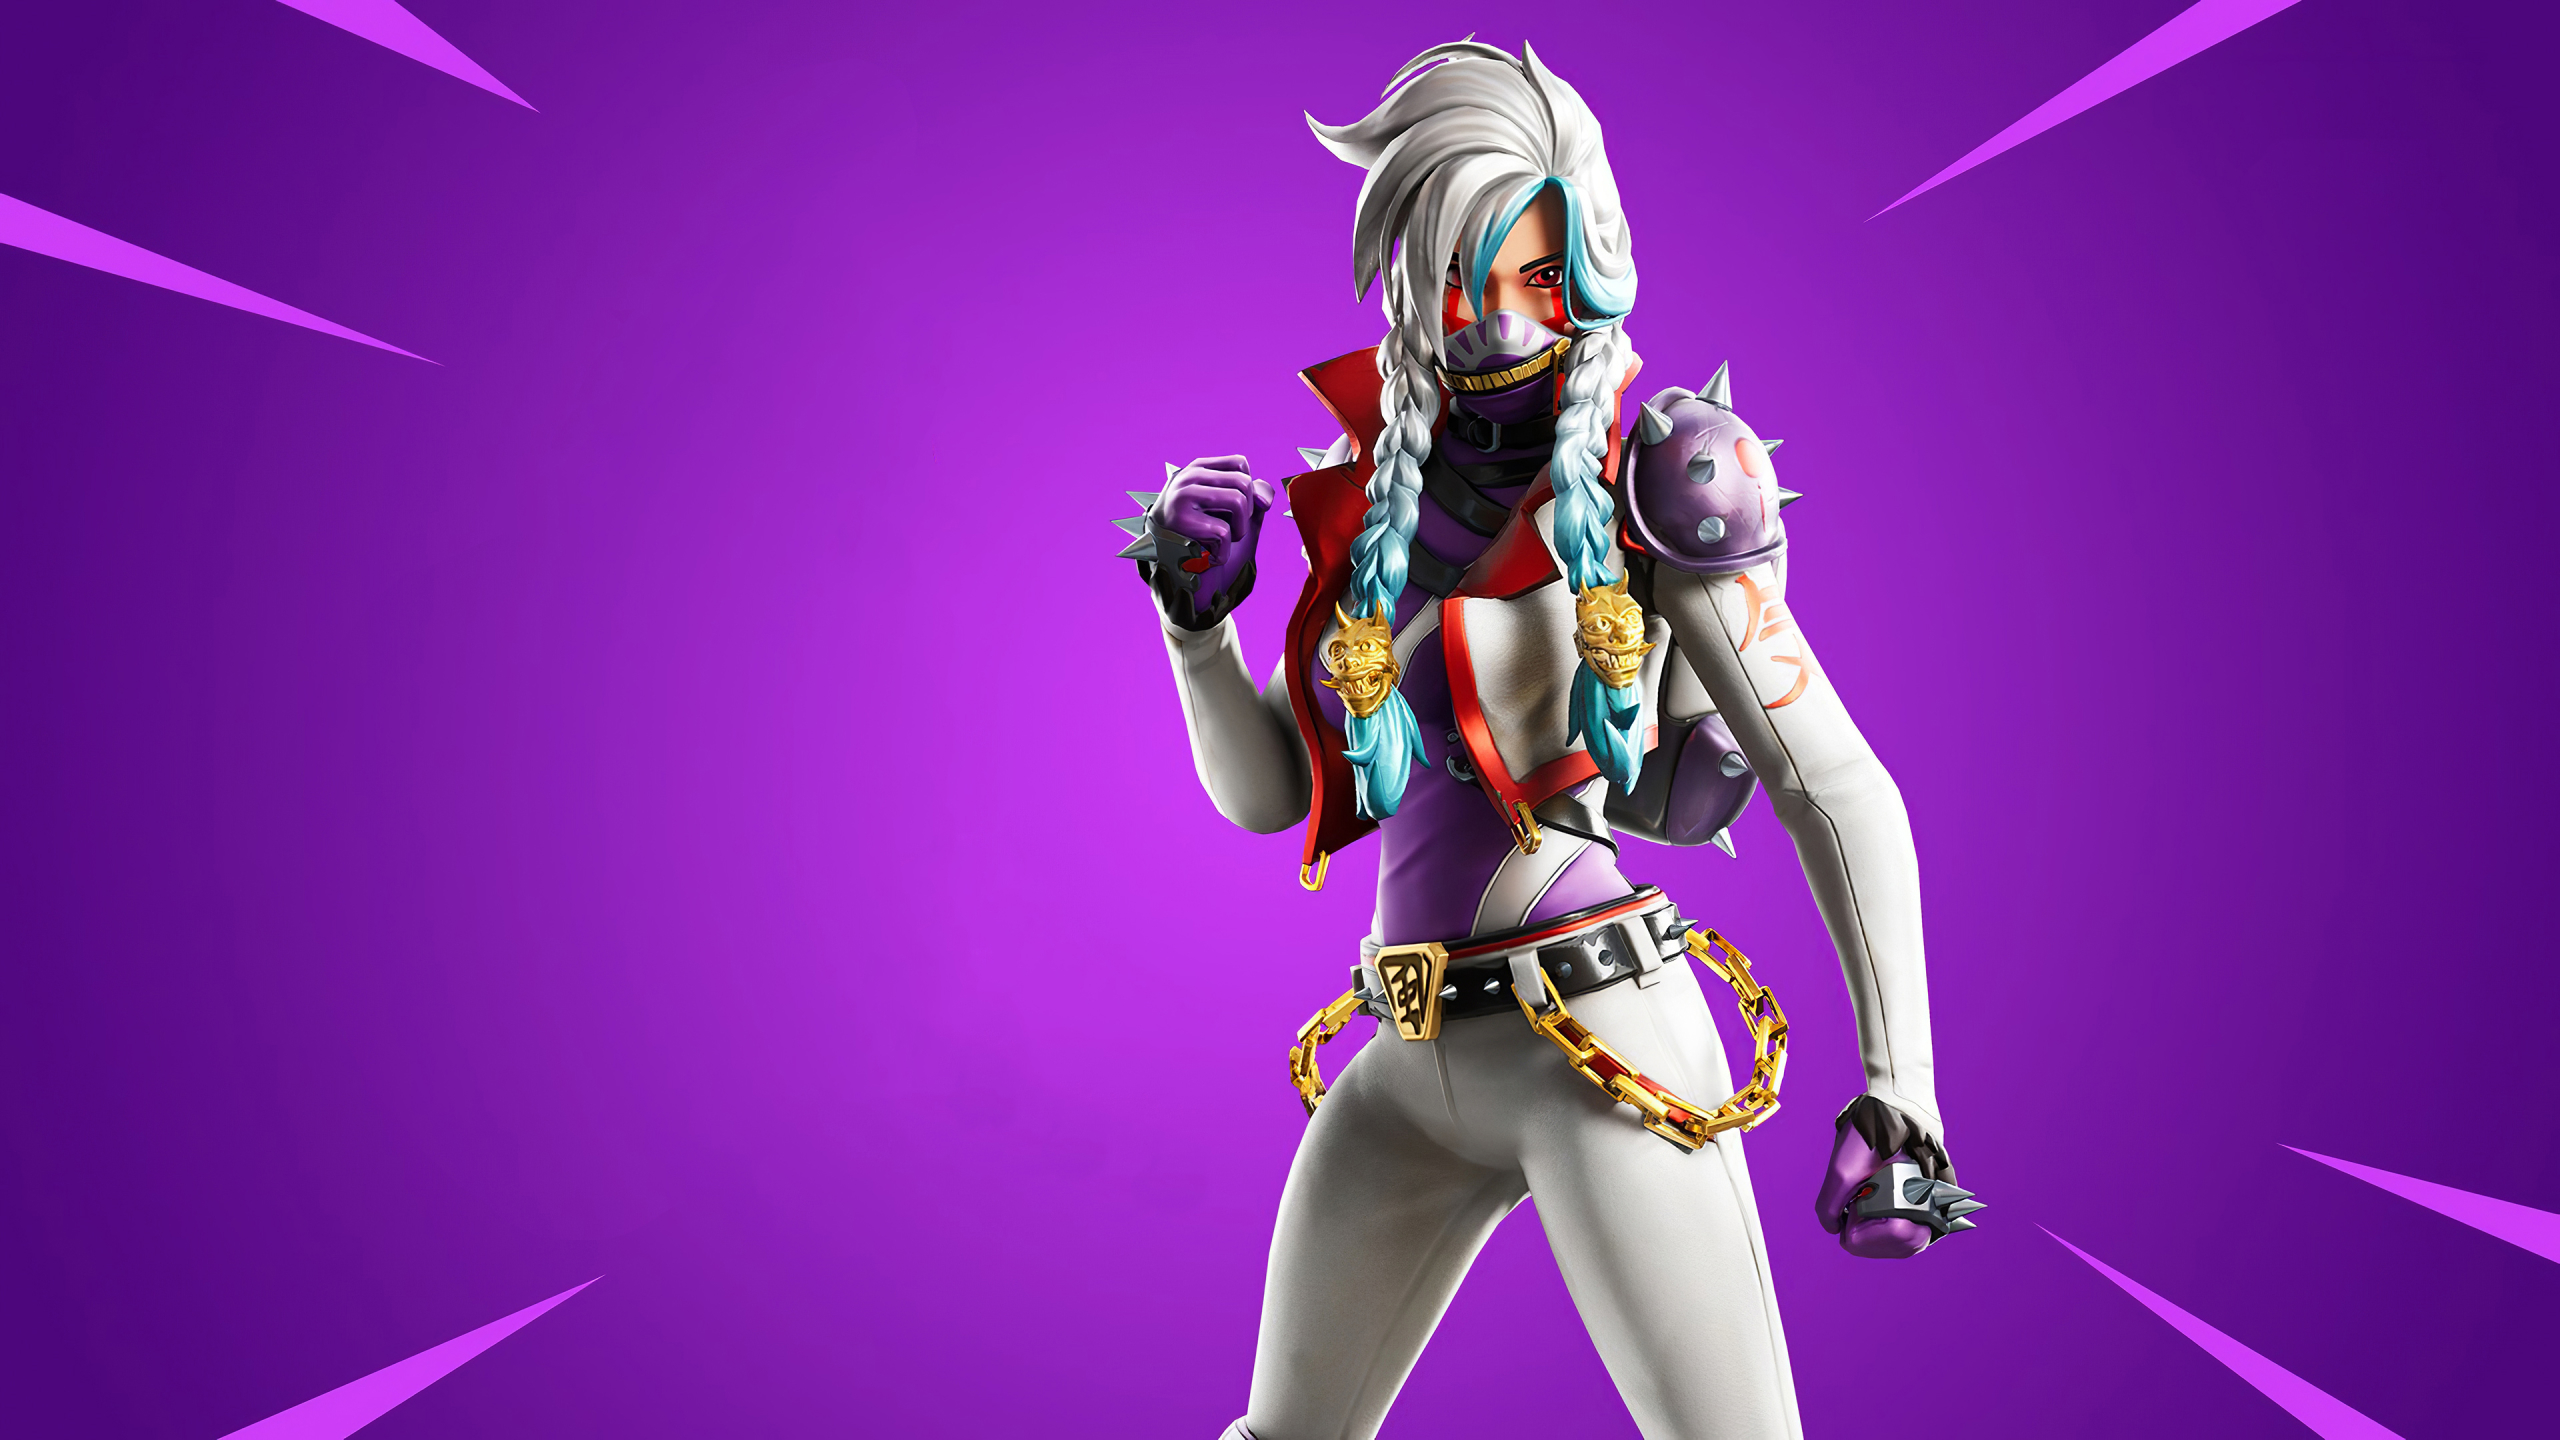 New Payback Fortnite Outfit 1440p Resolution Wallpaper